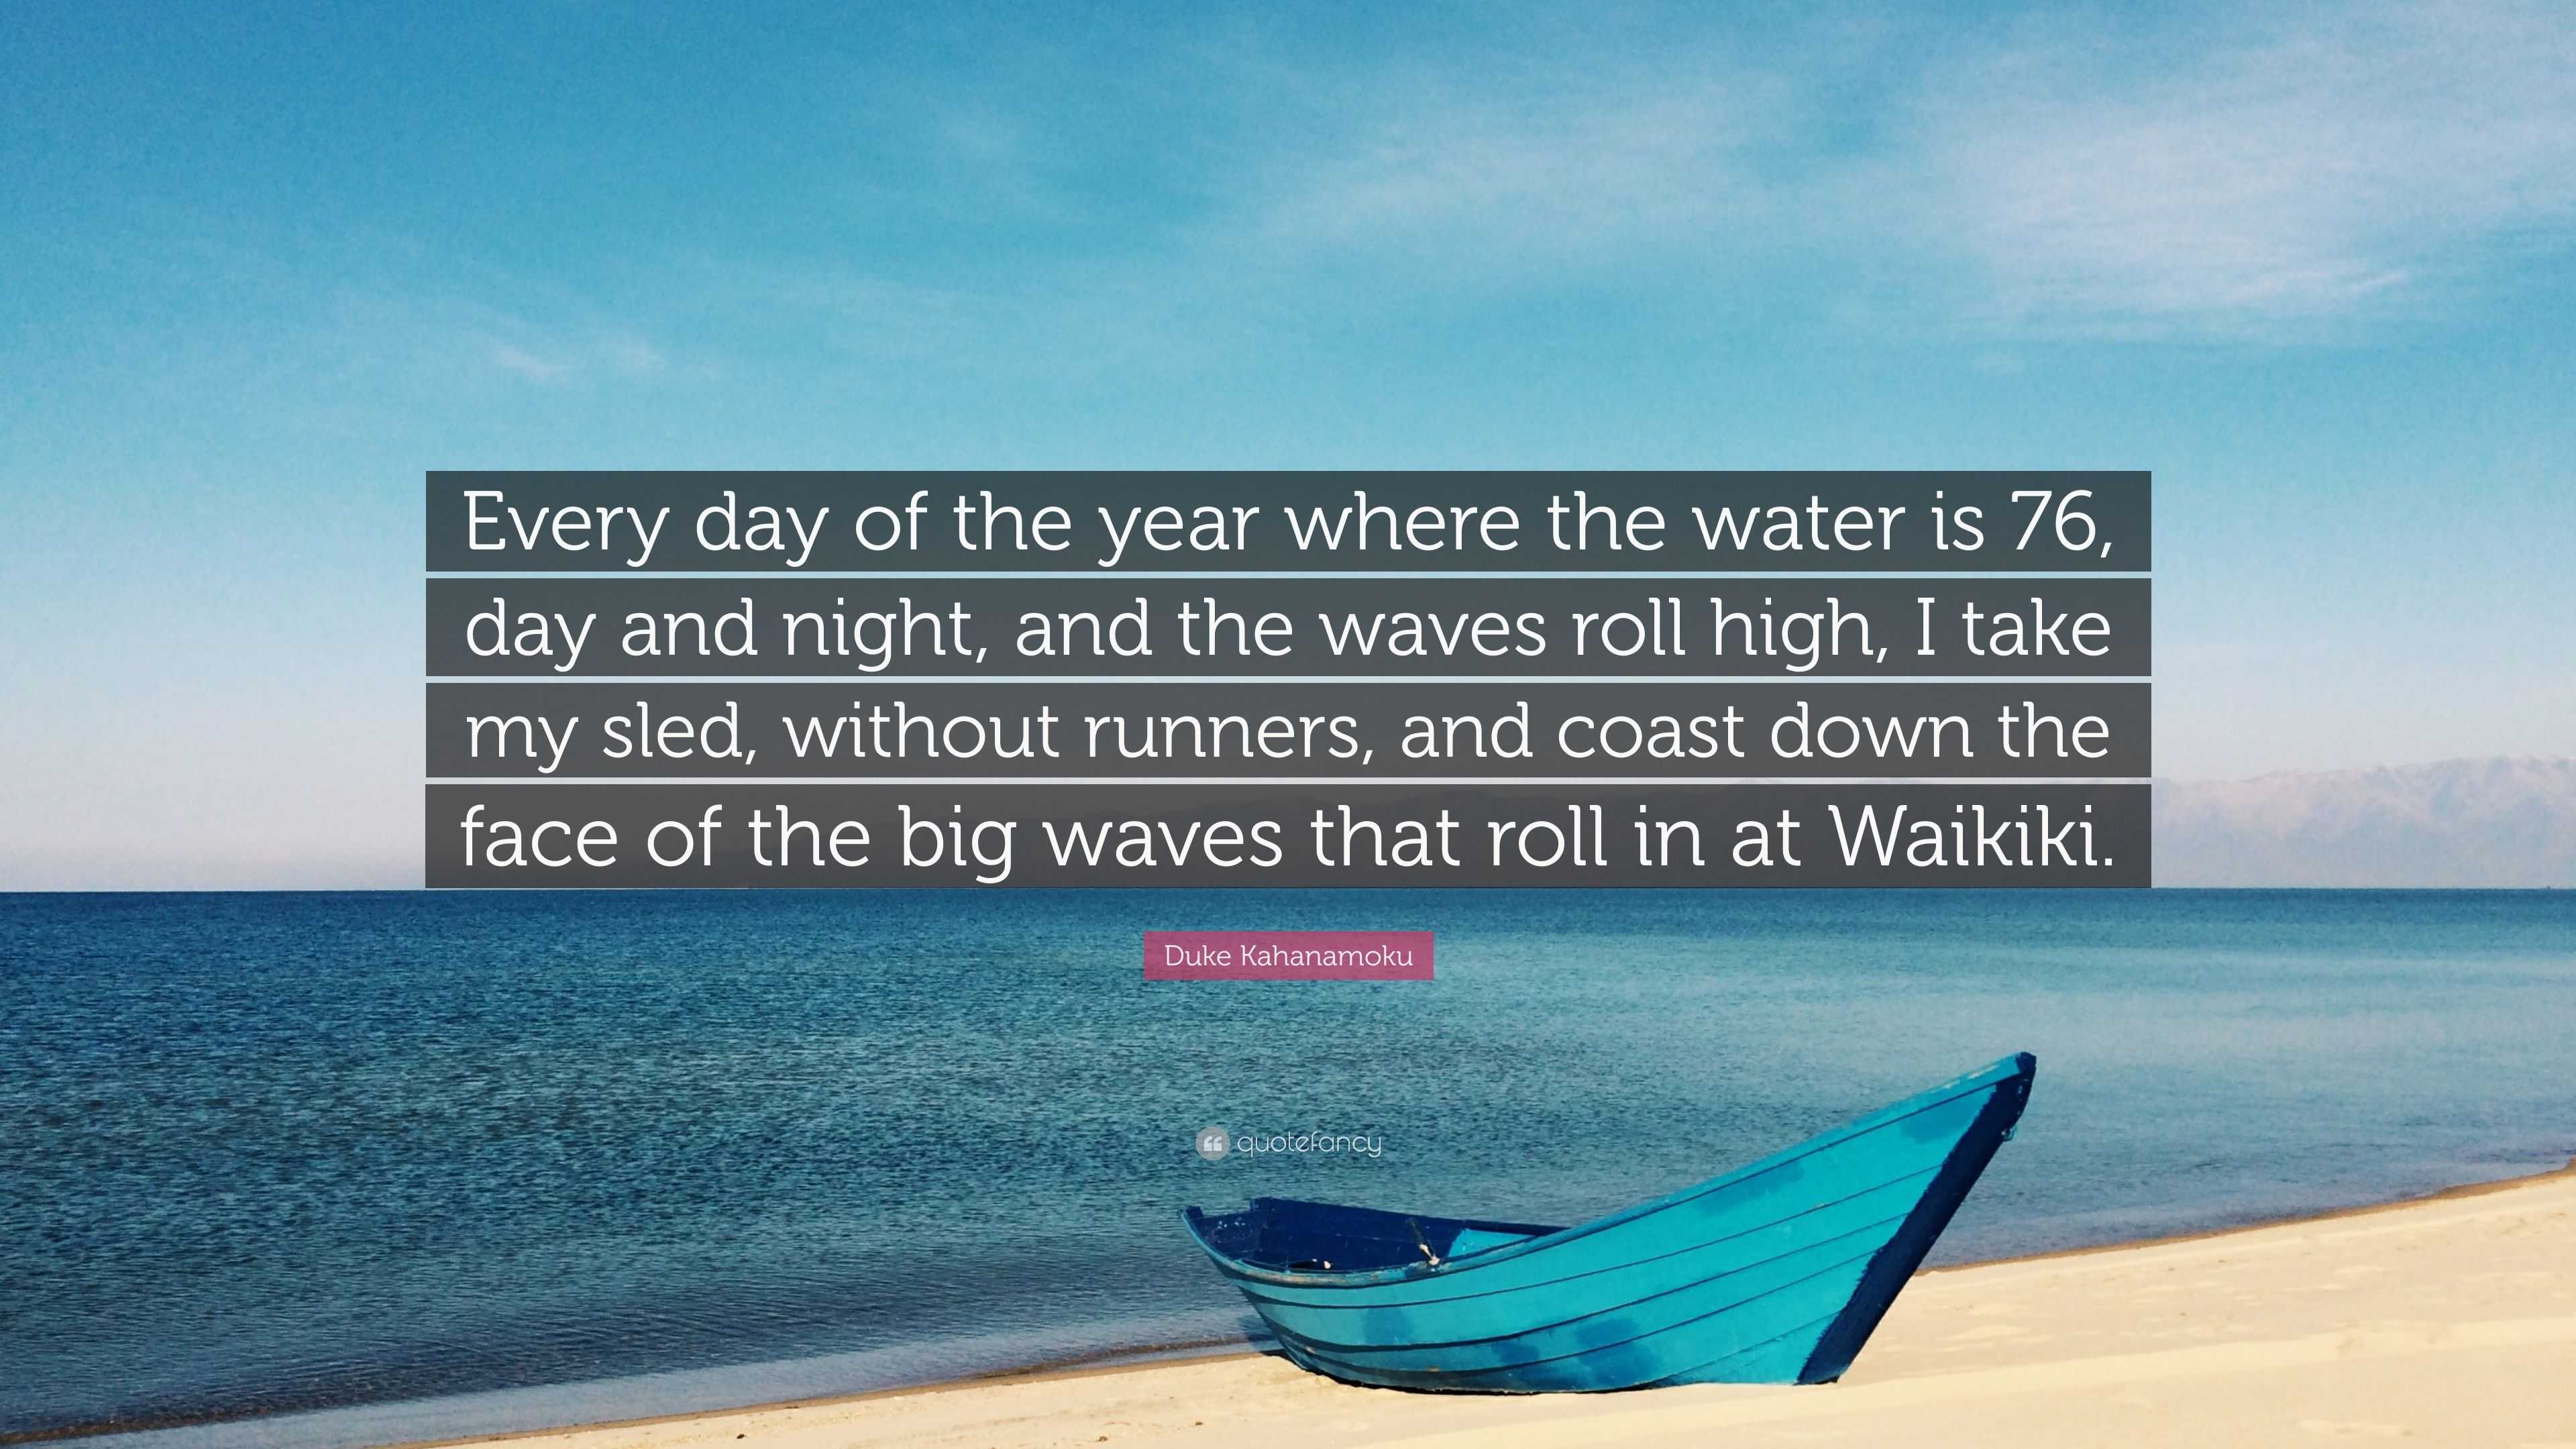 Duke Kahanamoku Quote: “Every day of the year where the water is 76